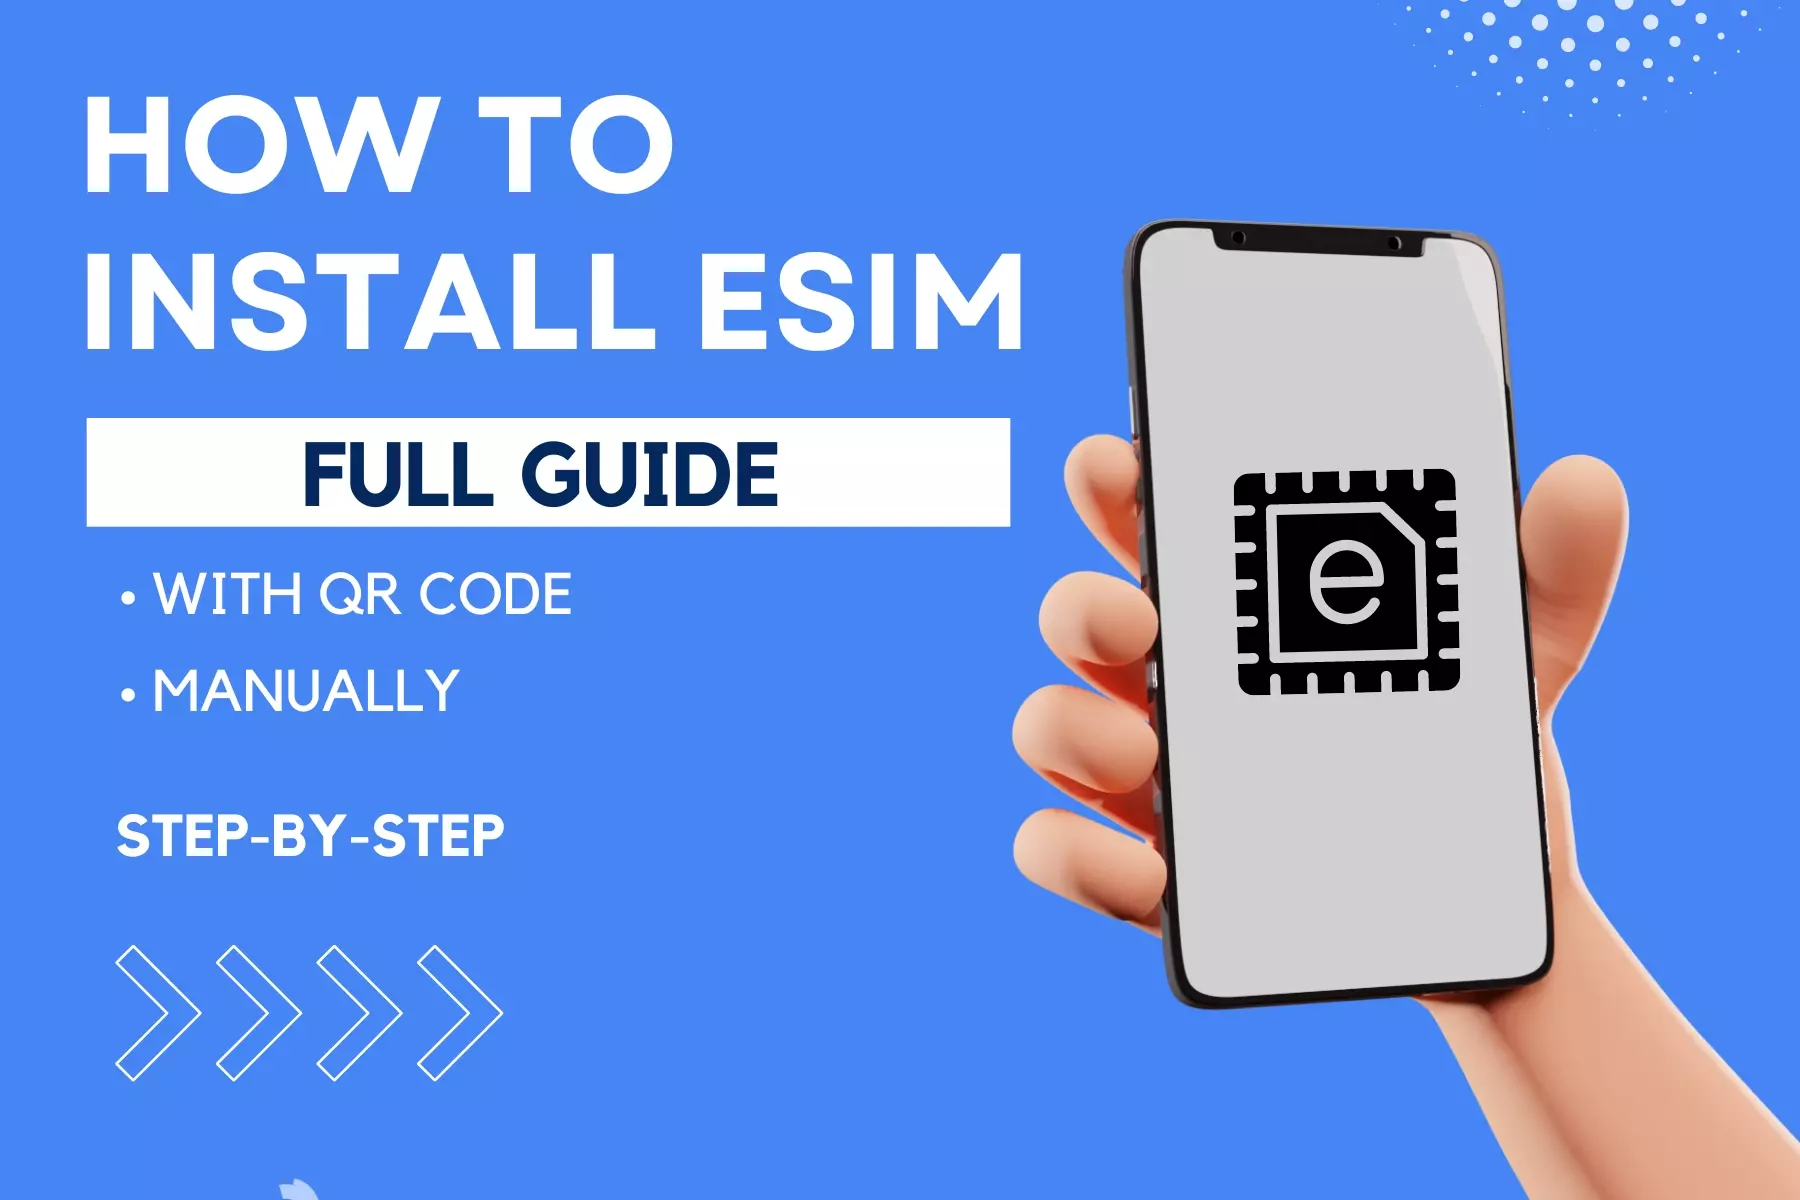 How to install eSIM full guide